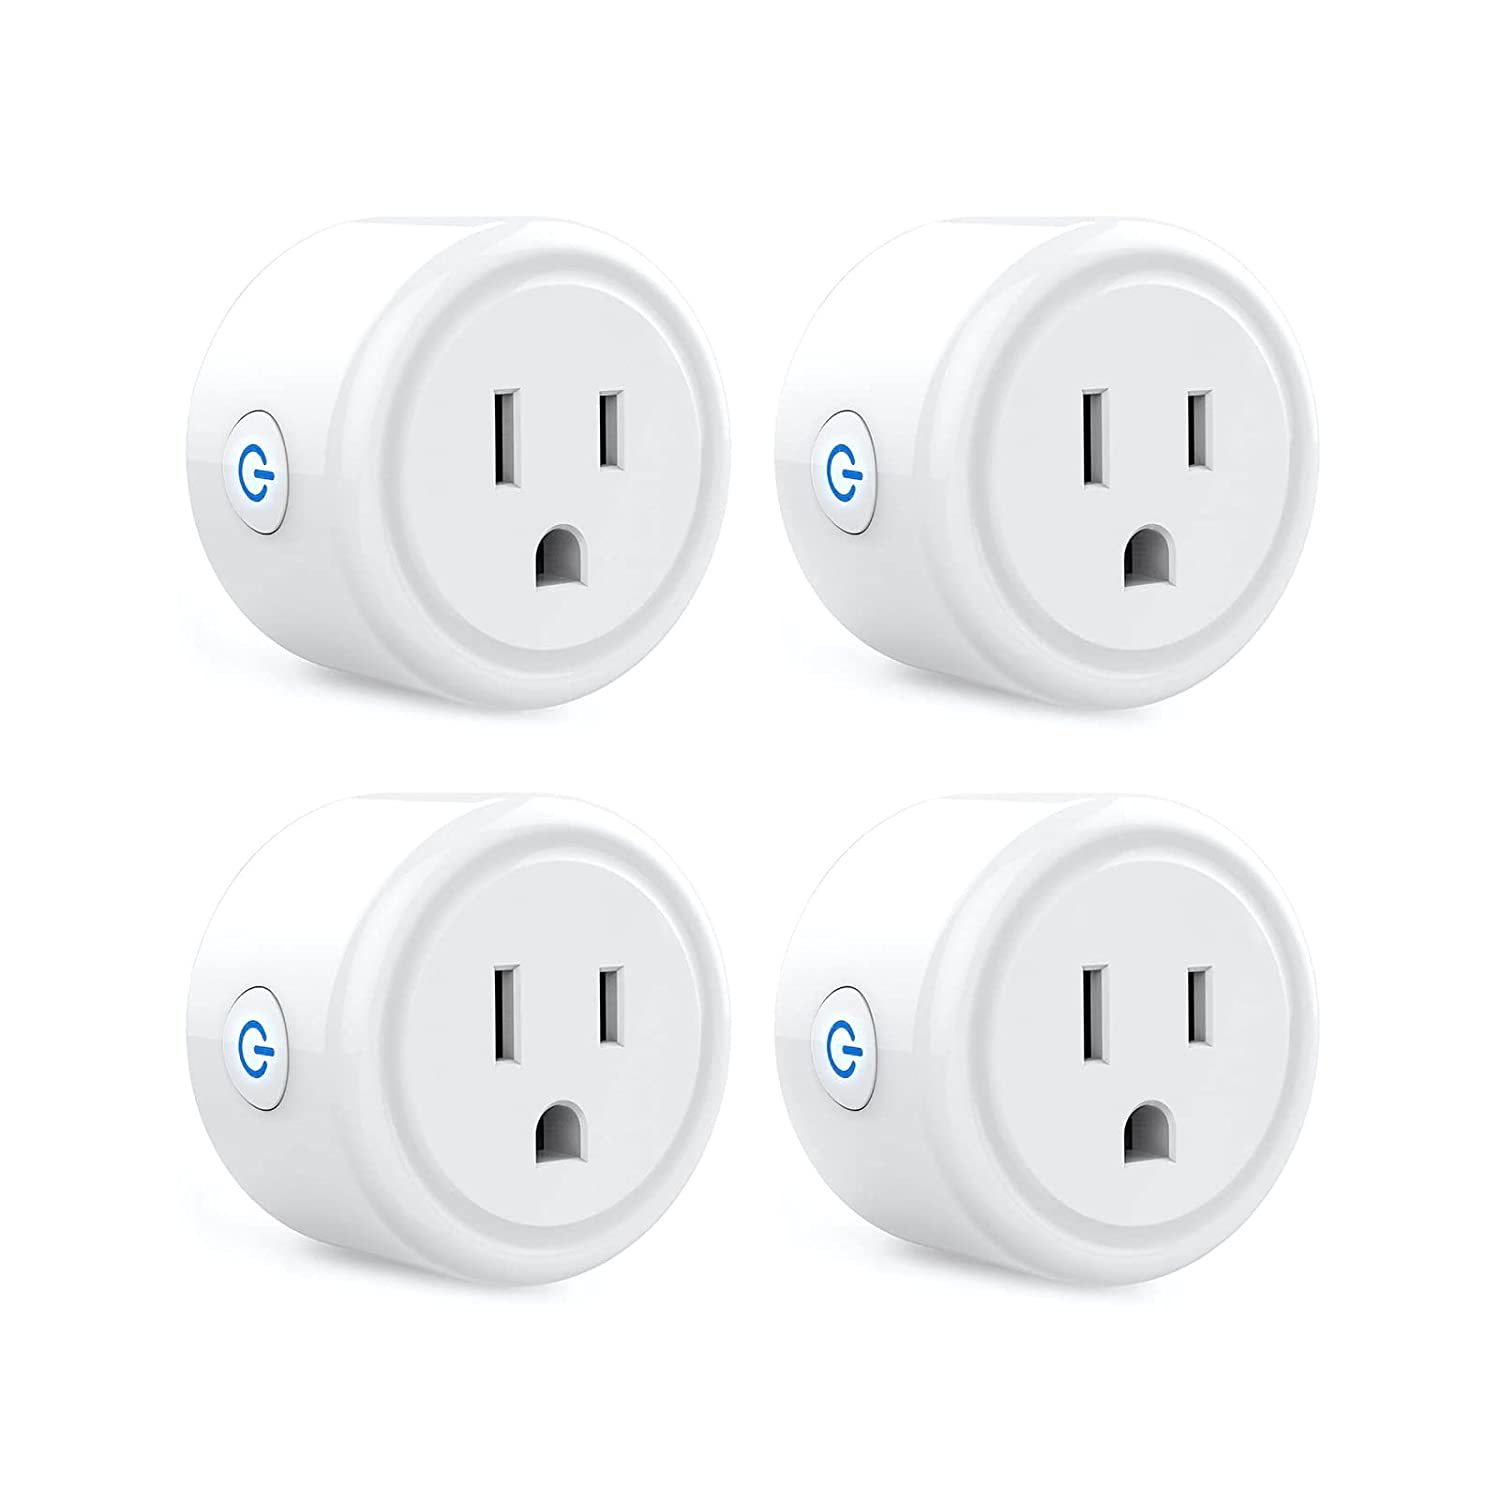 Amysen Smart Plug, Smart Home WiFi Outlet Works with Alexa, Echo, Google  Home, No Hub Required, ETL & FCC Certified, 2.4G WiFi Only, 4 Pack (Plug 4